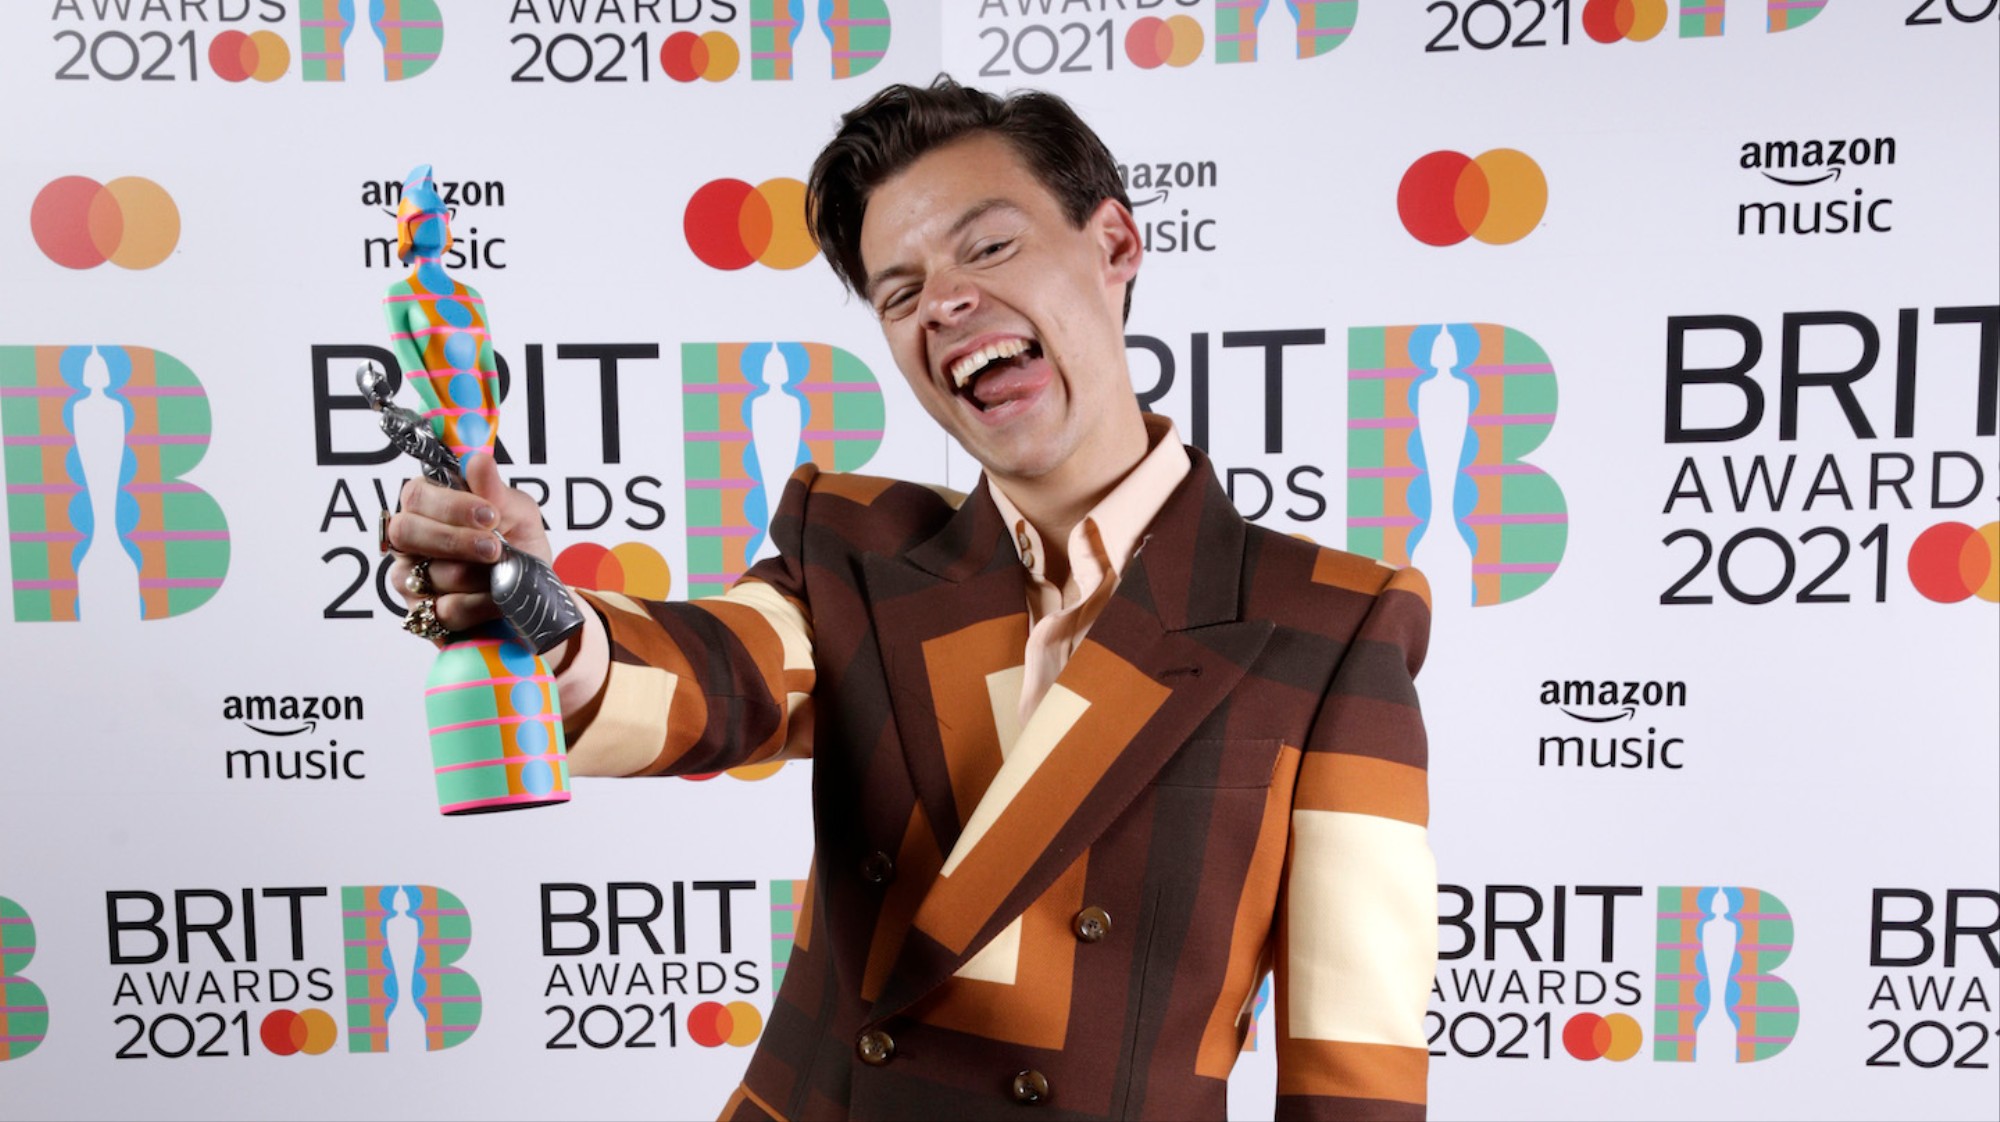 Brit Awards 2021: Harry Styles' bag, Dua Lipa and the rest of the winners - i-D